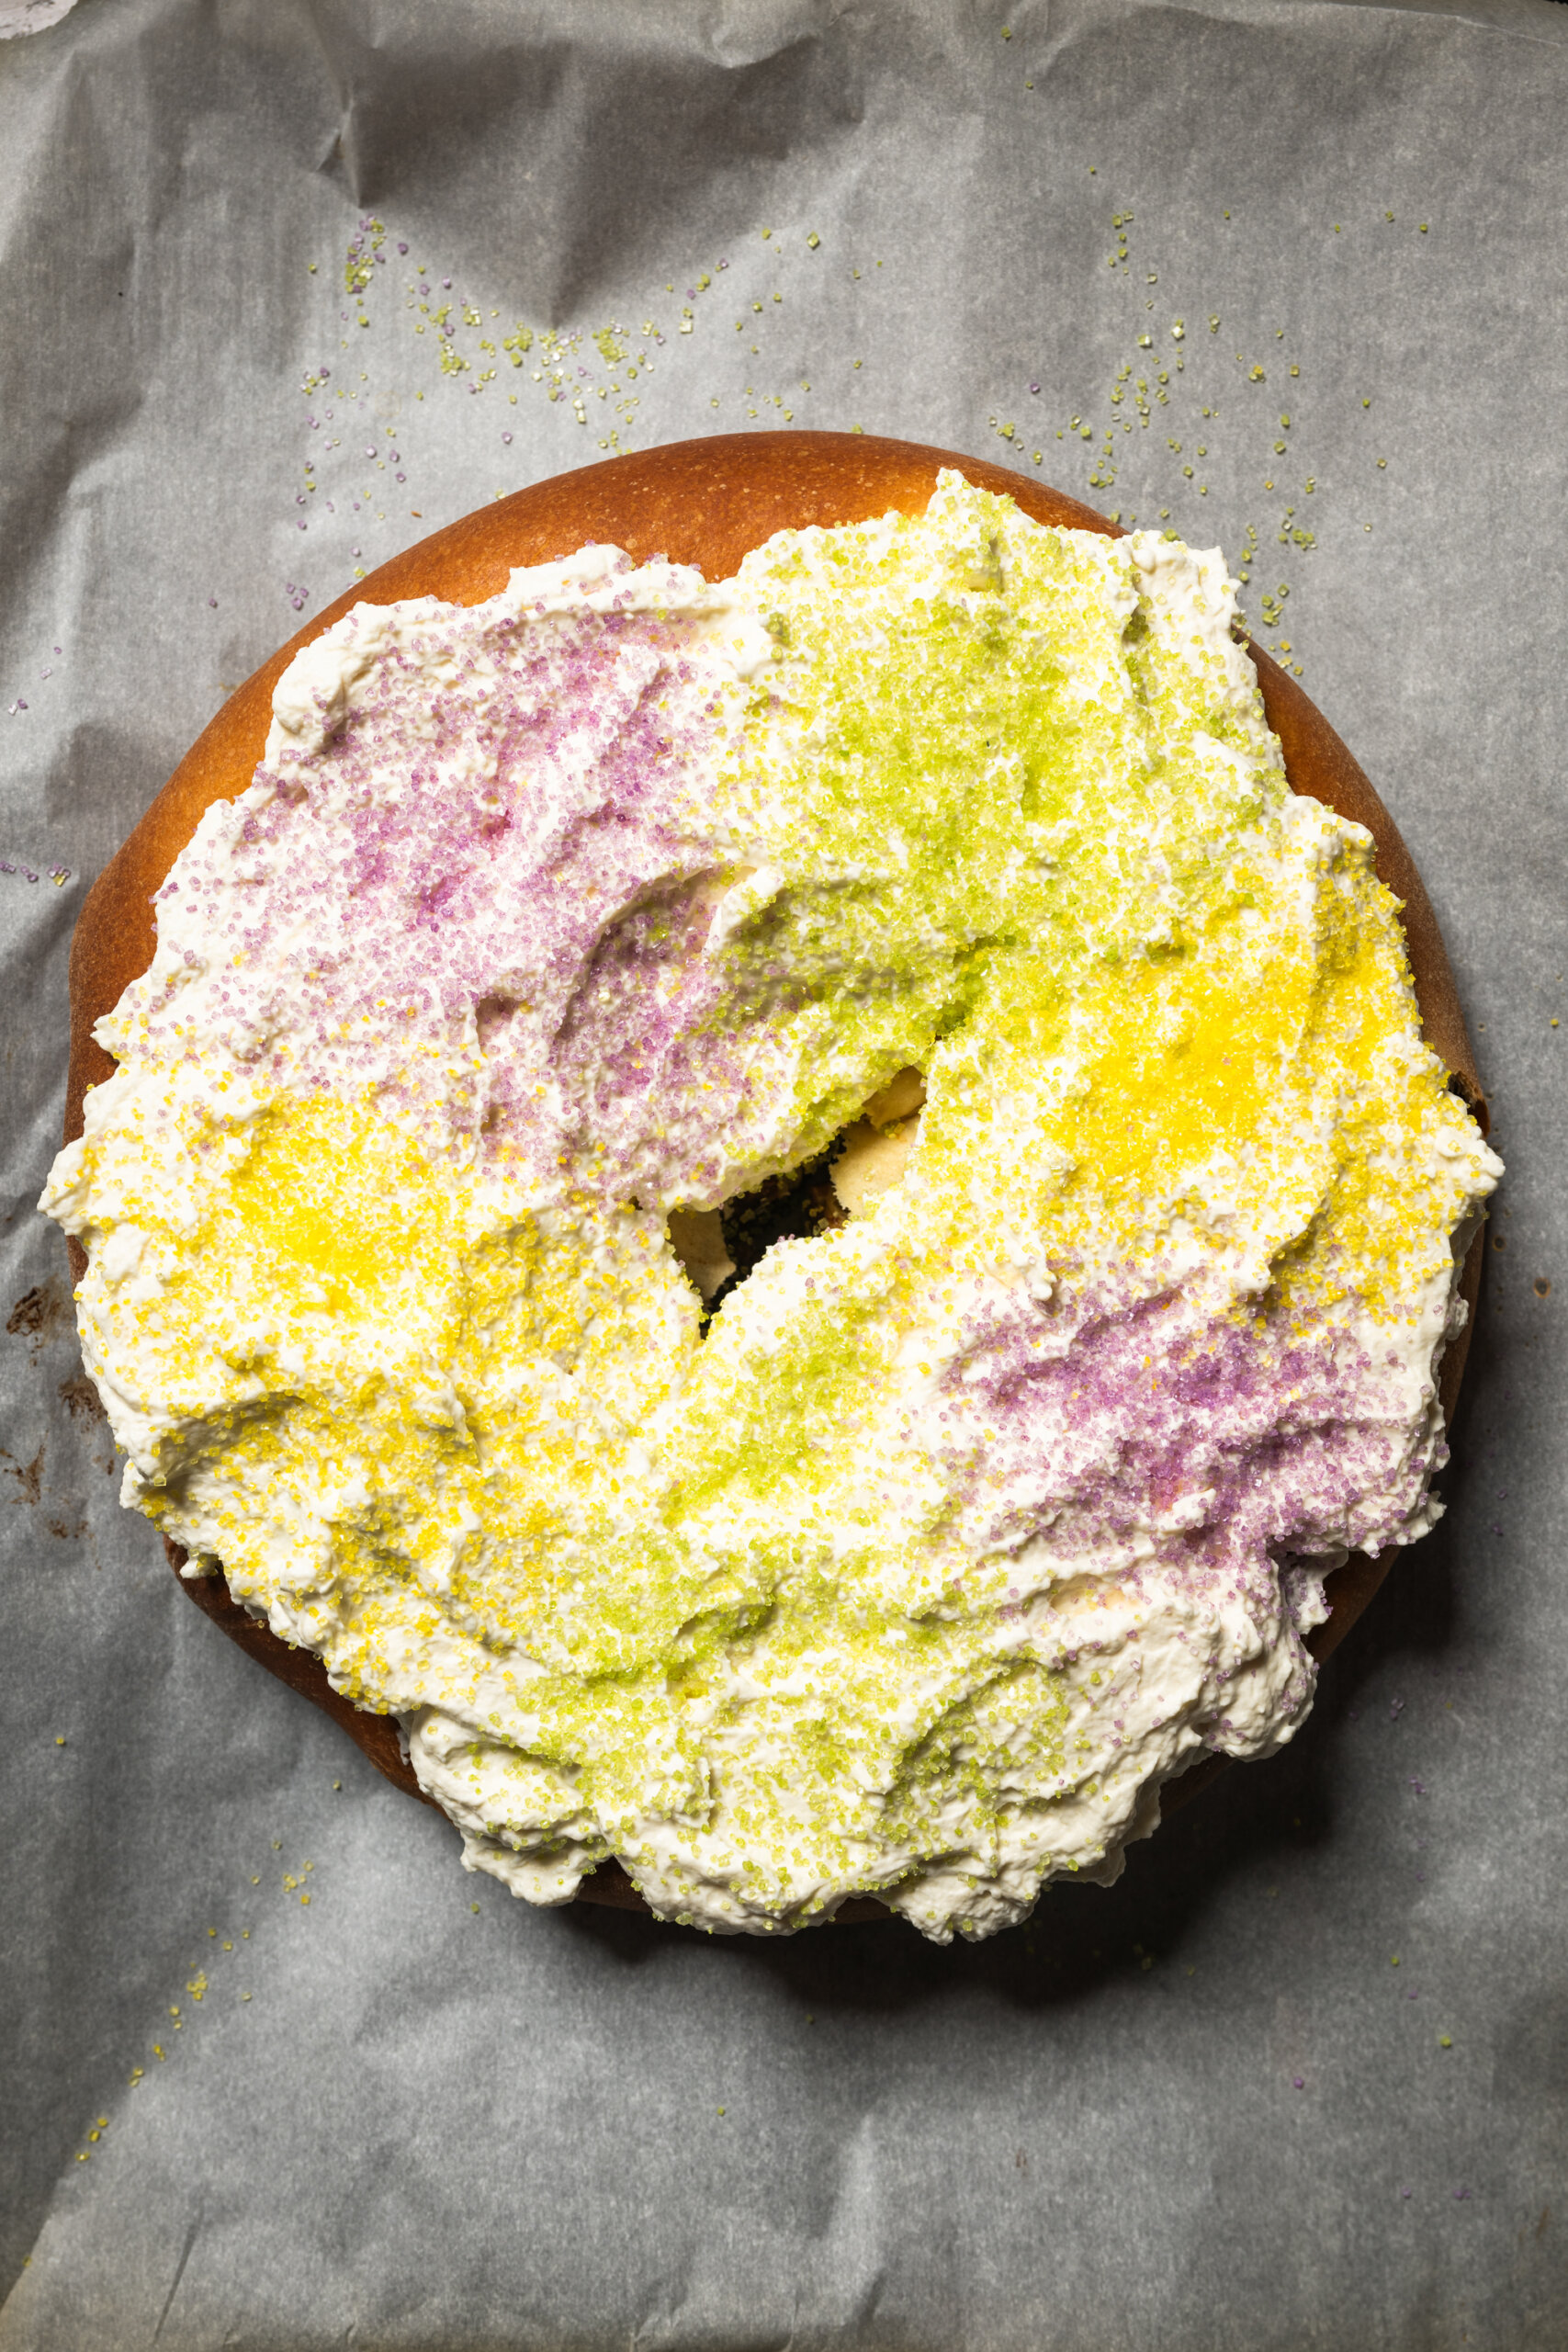 The finished king cake with whipped mascarpone topping decorated with purple, green, and yellow sanding sugars